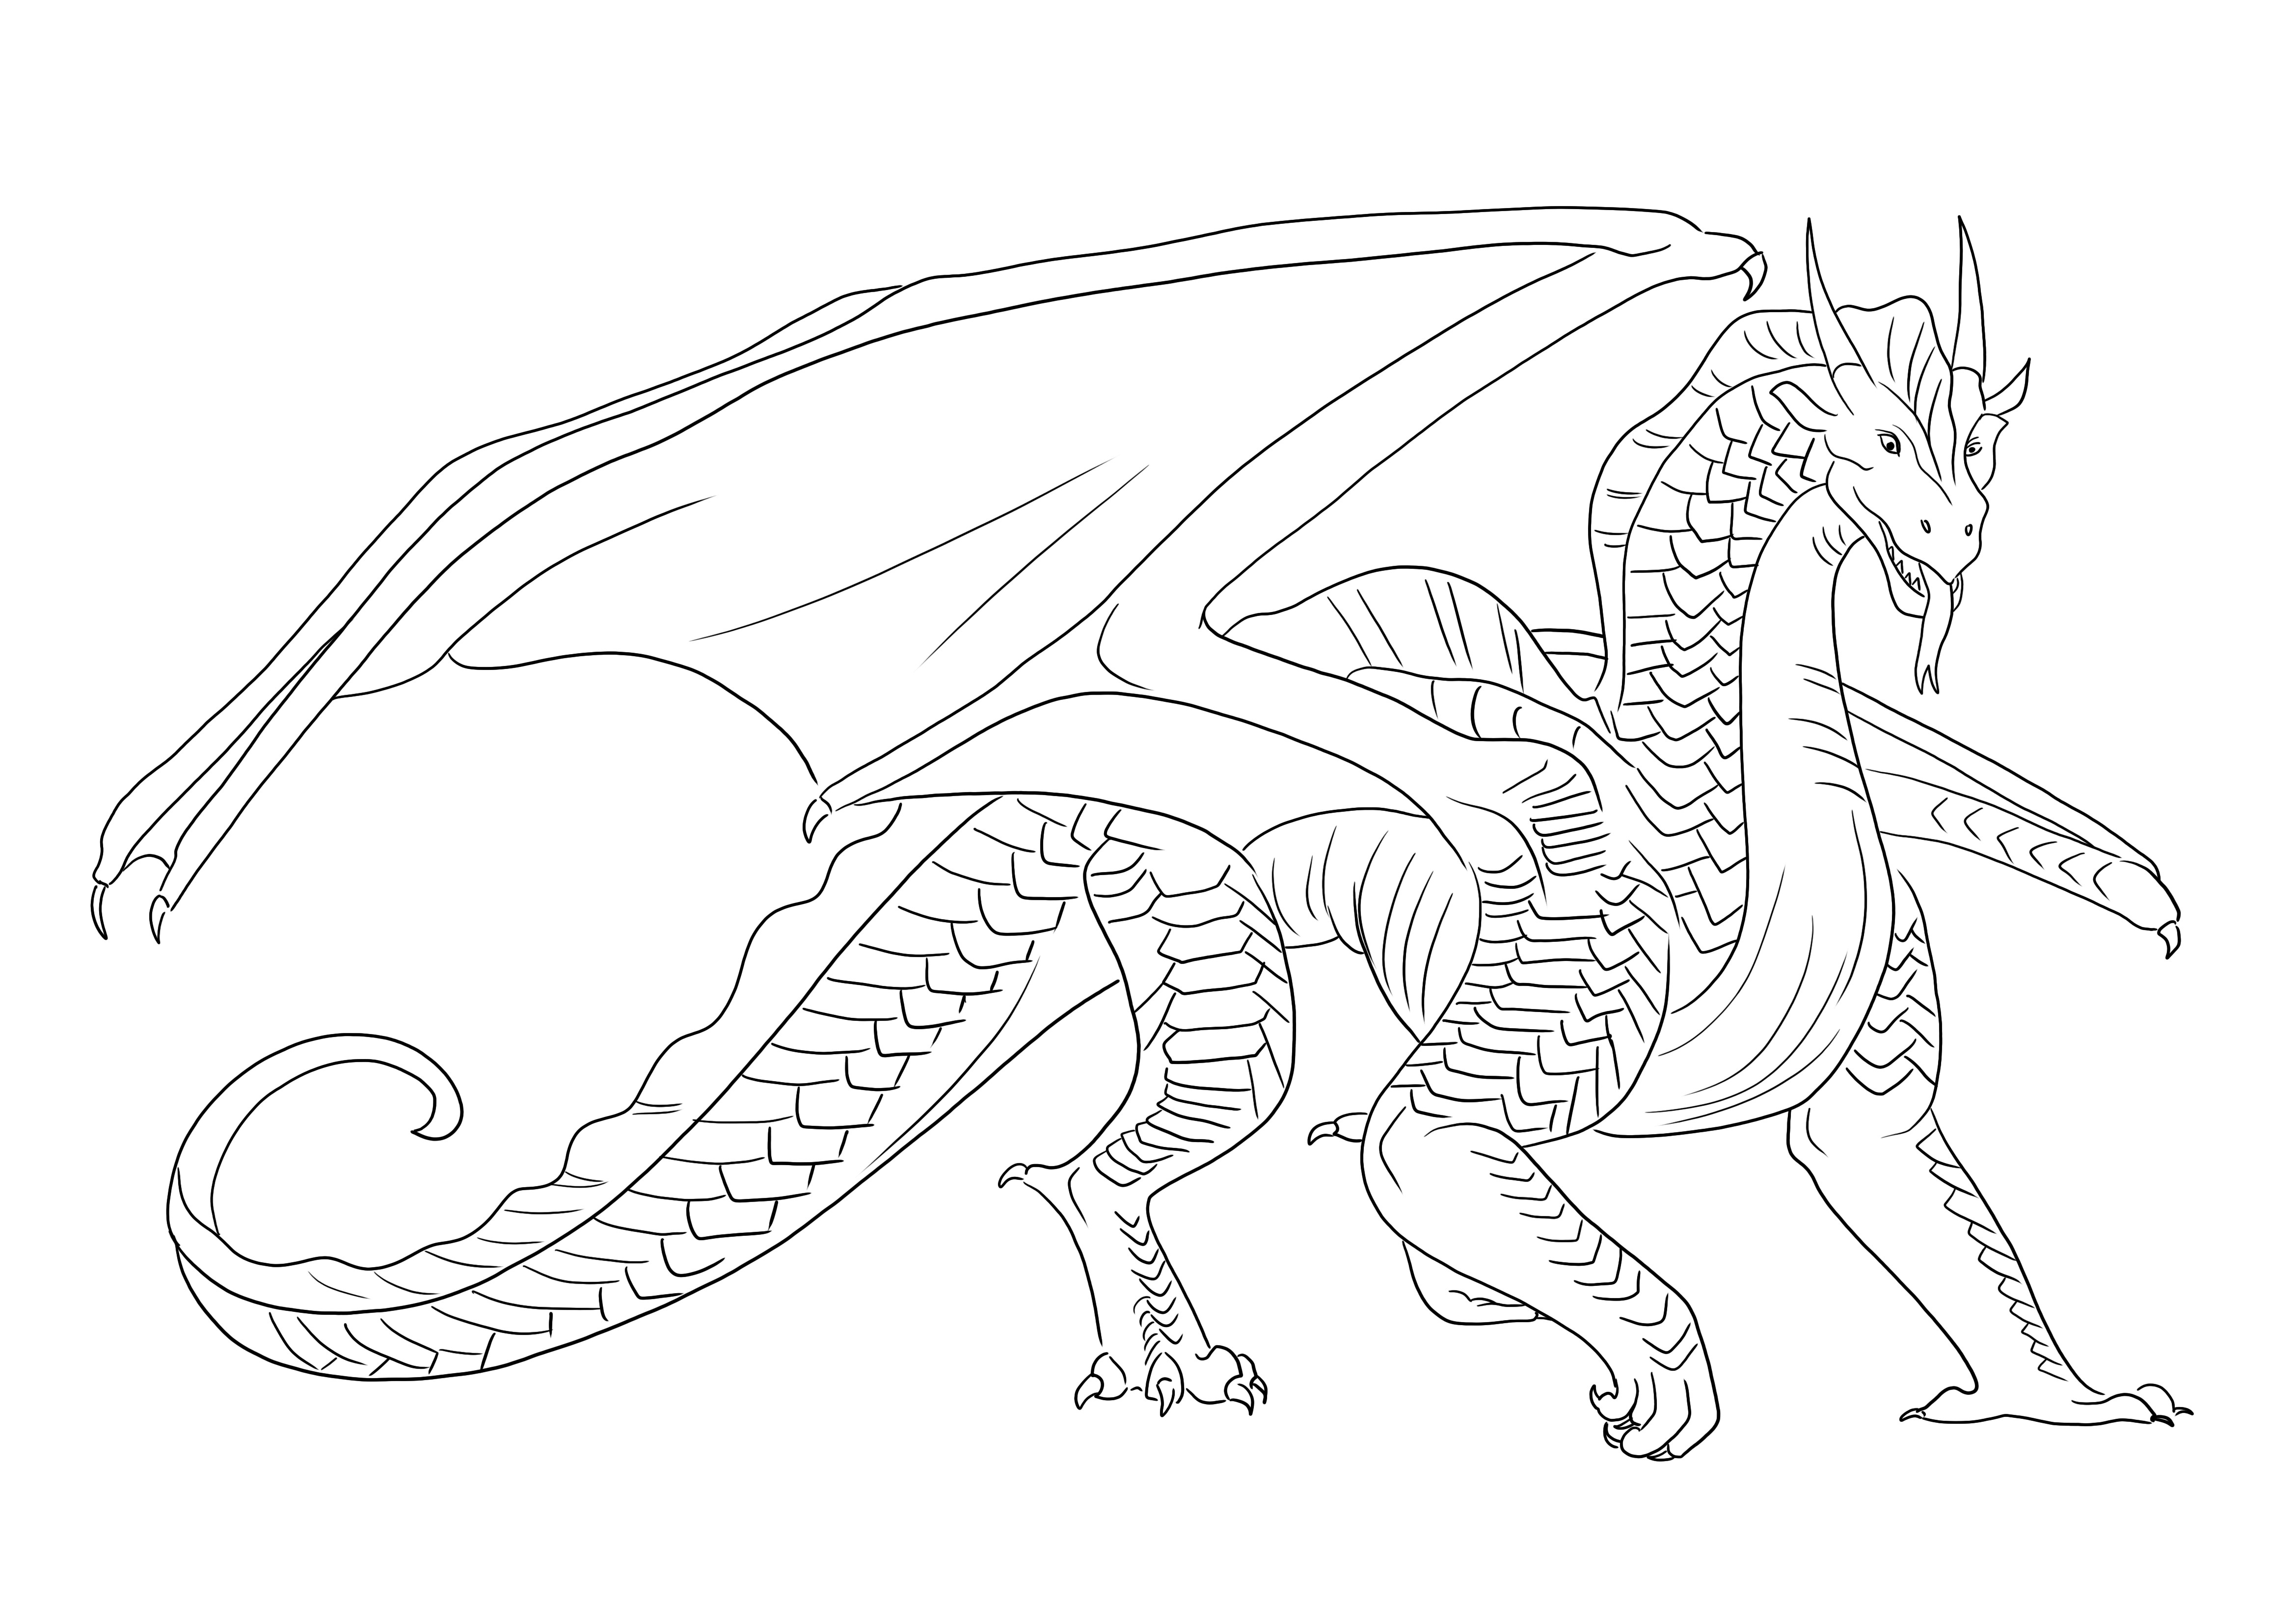 Sandwing Dragon to color for free and enjoy free time together